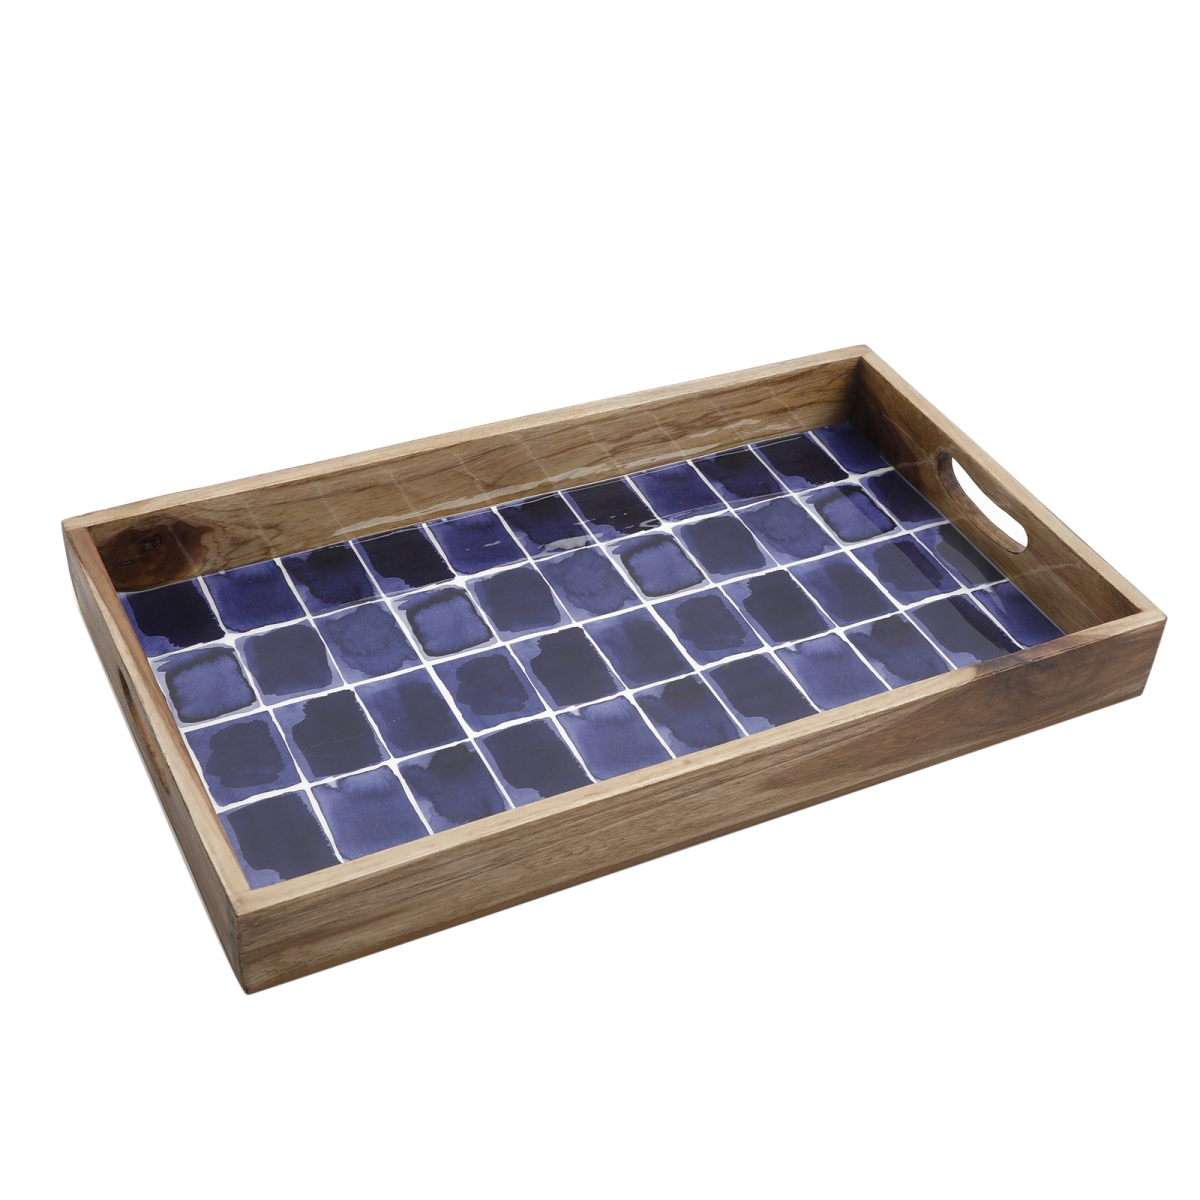 120999.01 17 In. Mozambique Enameled Serving Tray, Blue Bricks